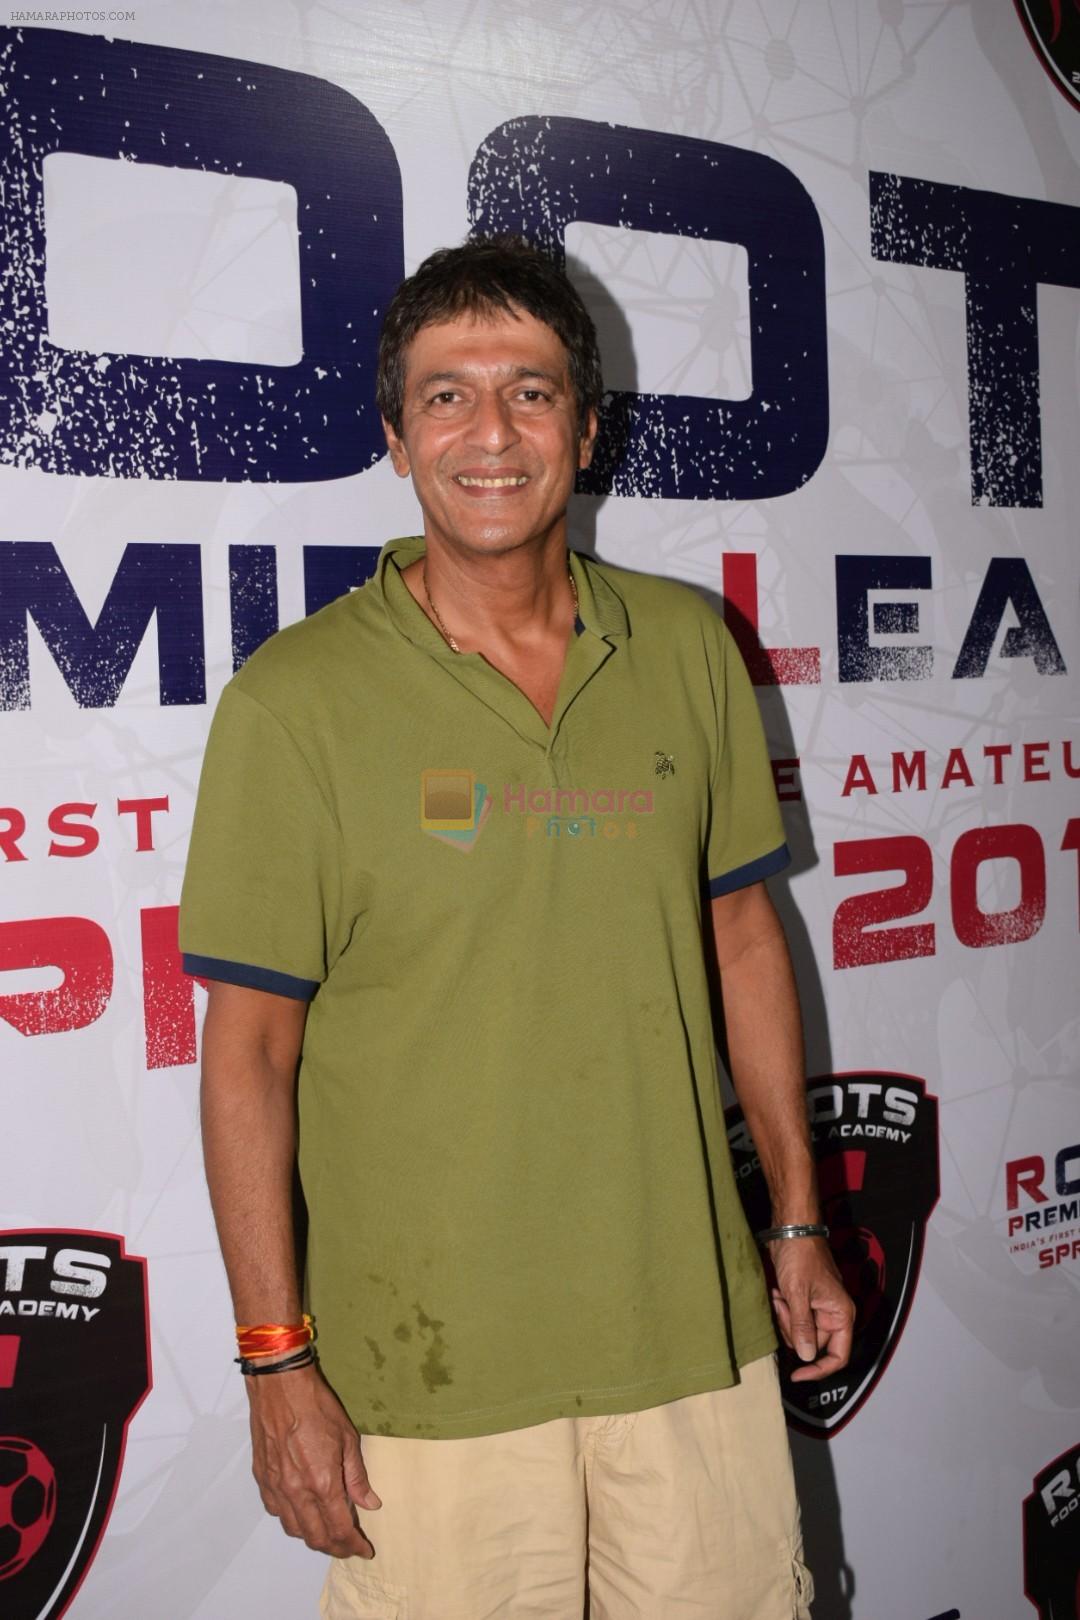 Chunky Pandey at Roots Premiere League Spring Season 2018 For Amateur Football In India on 14th March 2018